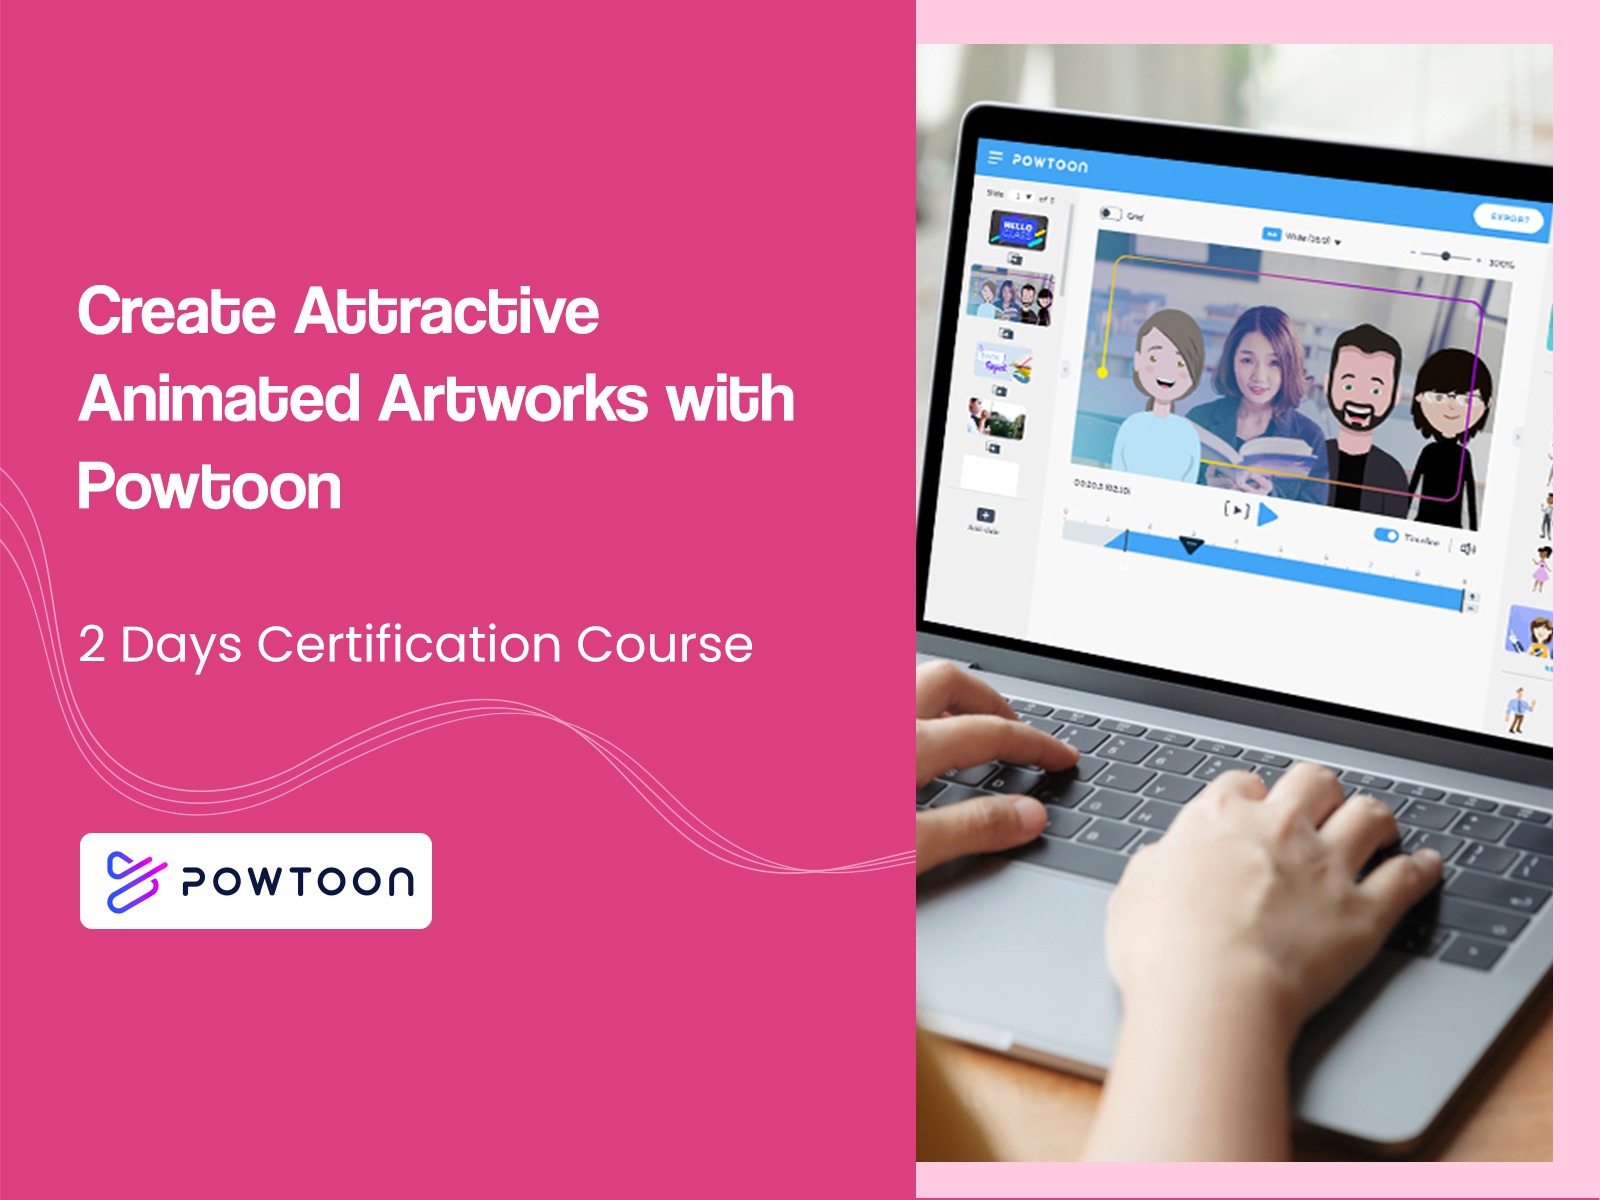 Create Attractive Animated Artworks with Powtoon